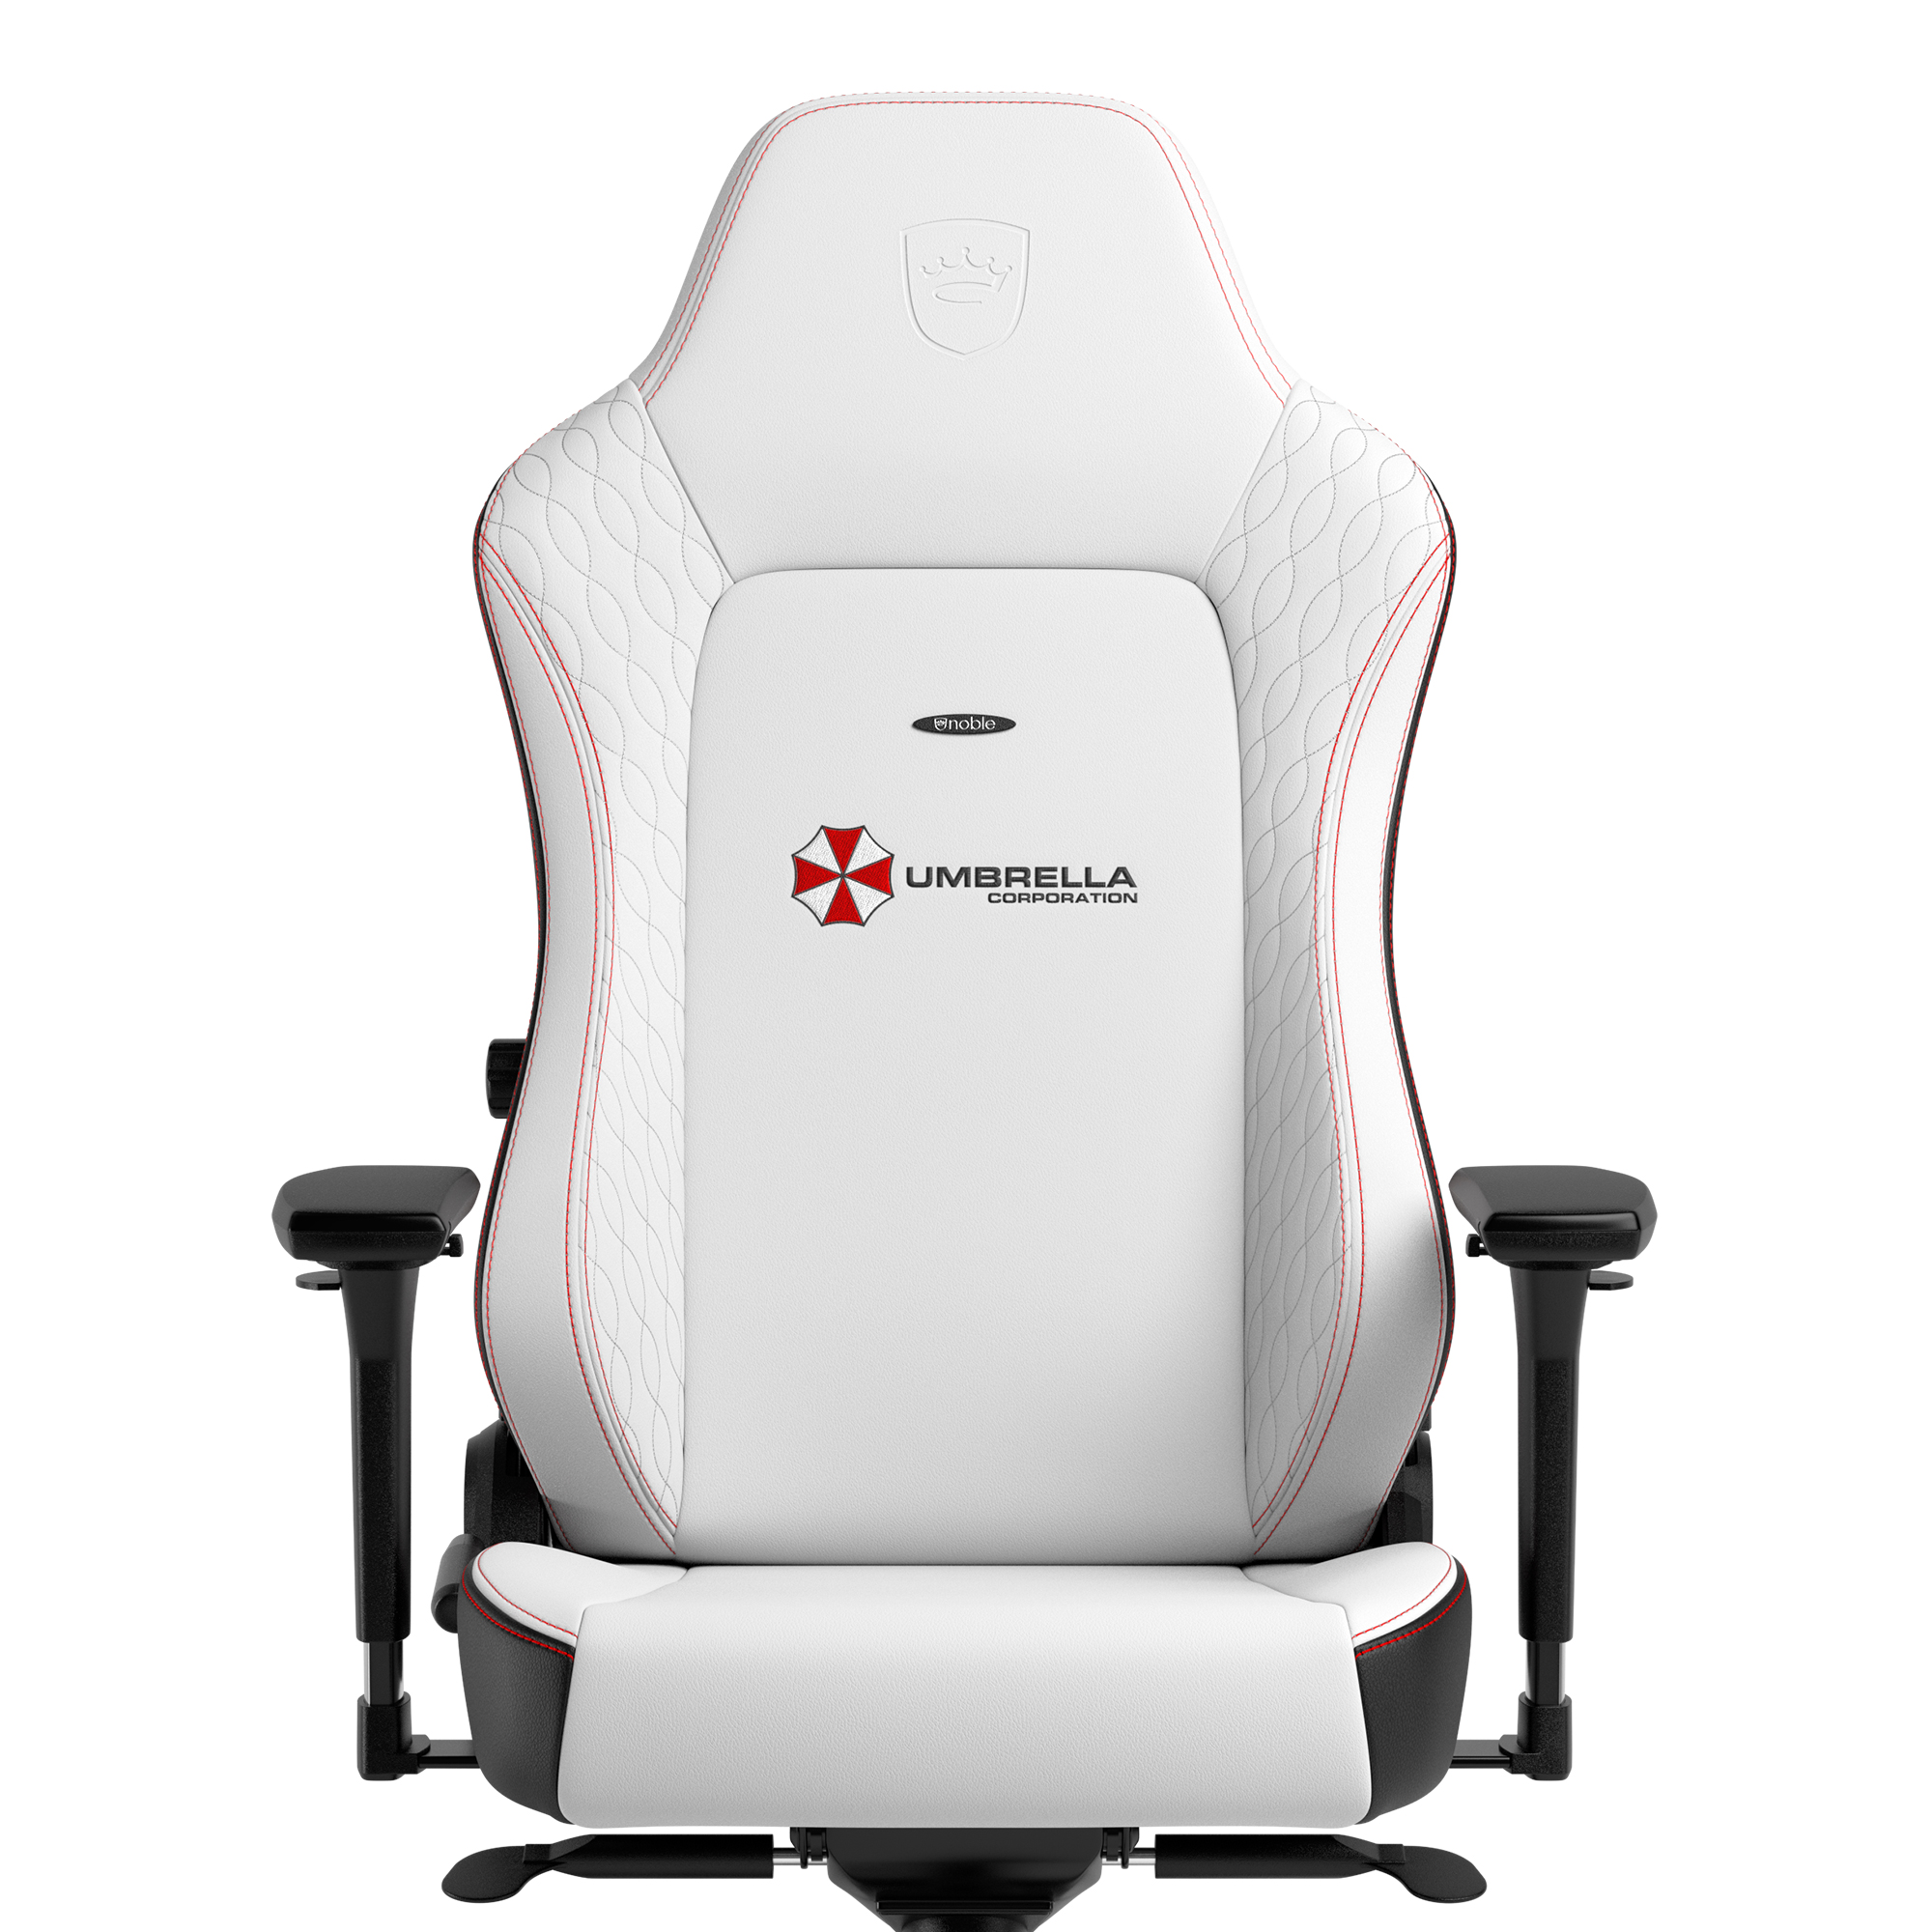 noblechairs - noblechairs HERO Gaming Chair Resident Evil Umbrella Edition 